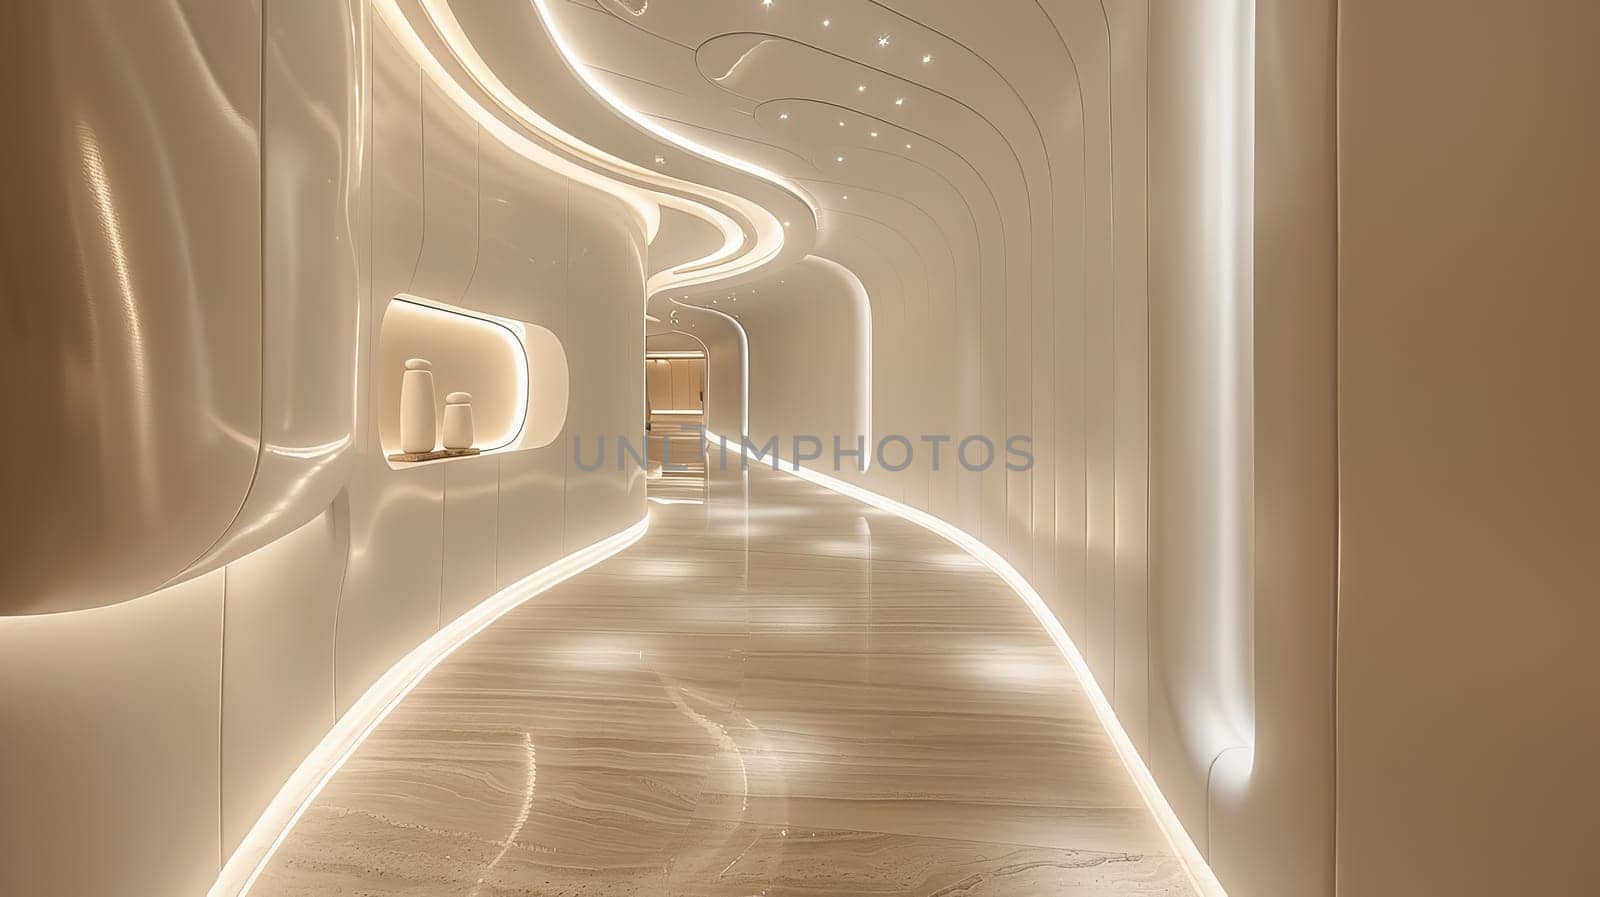 A long, narrow hallway with white walls and shelves. The hallway is lit by a series of lights, creating a bright and open atmosphere